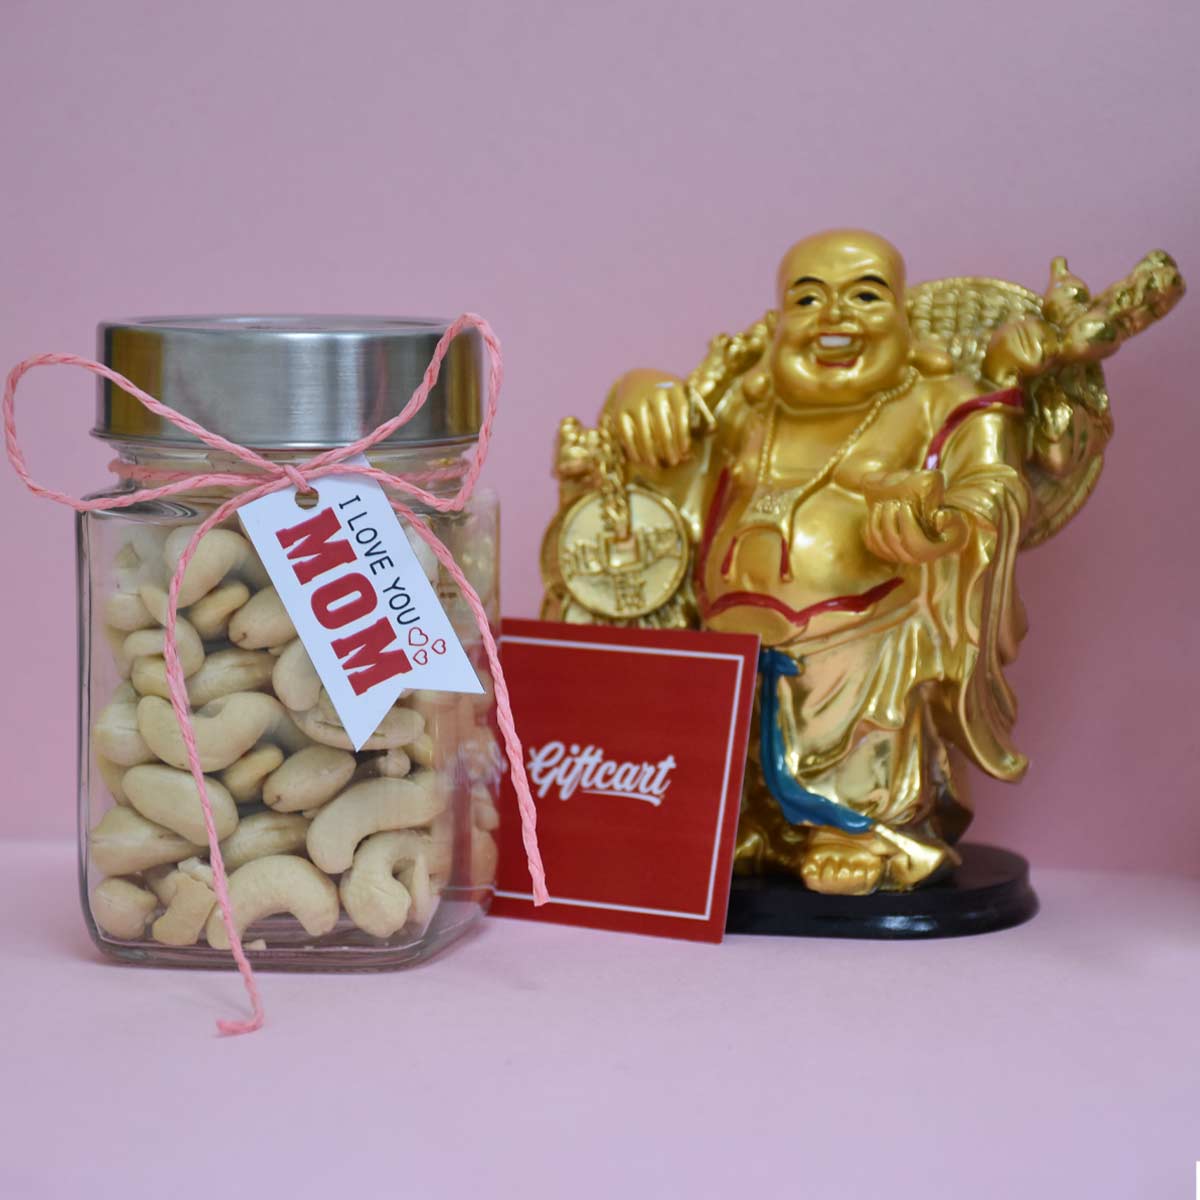 Mothers Day Gift Hamper with Cashew Nuts and Laughing Buddha-1